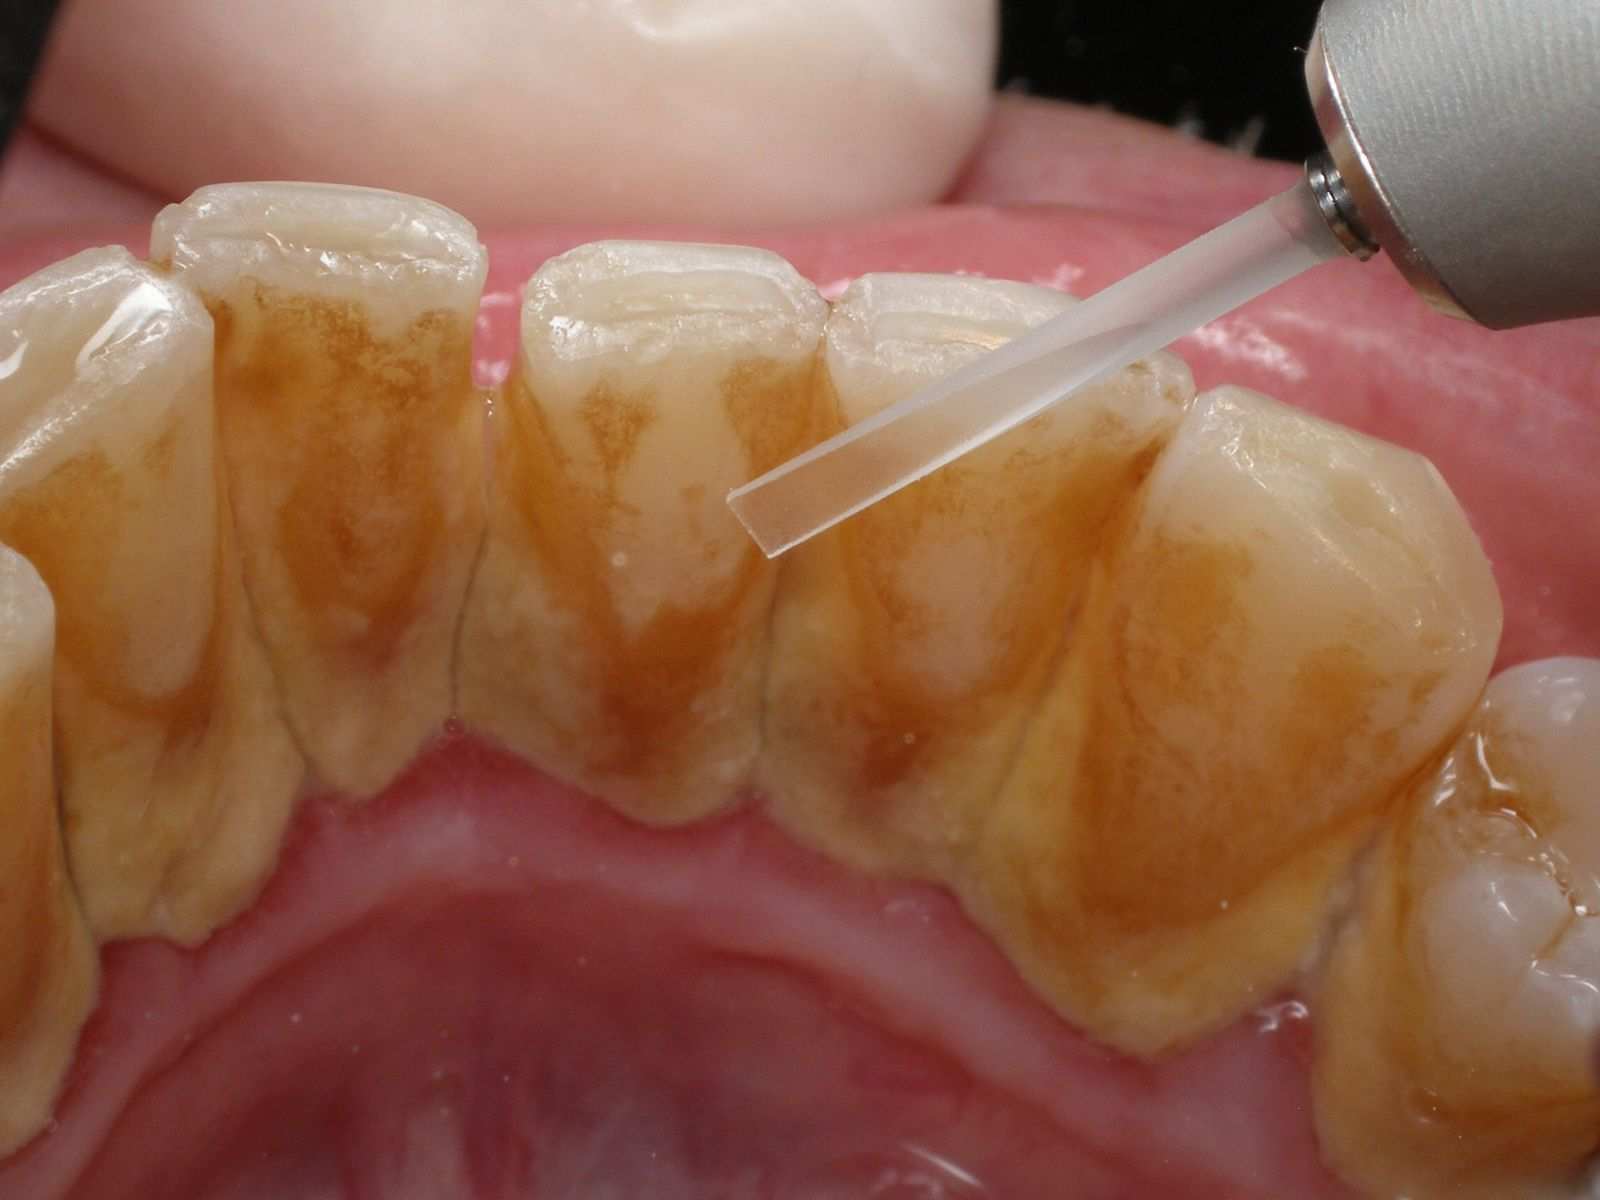 dental calculus before and after